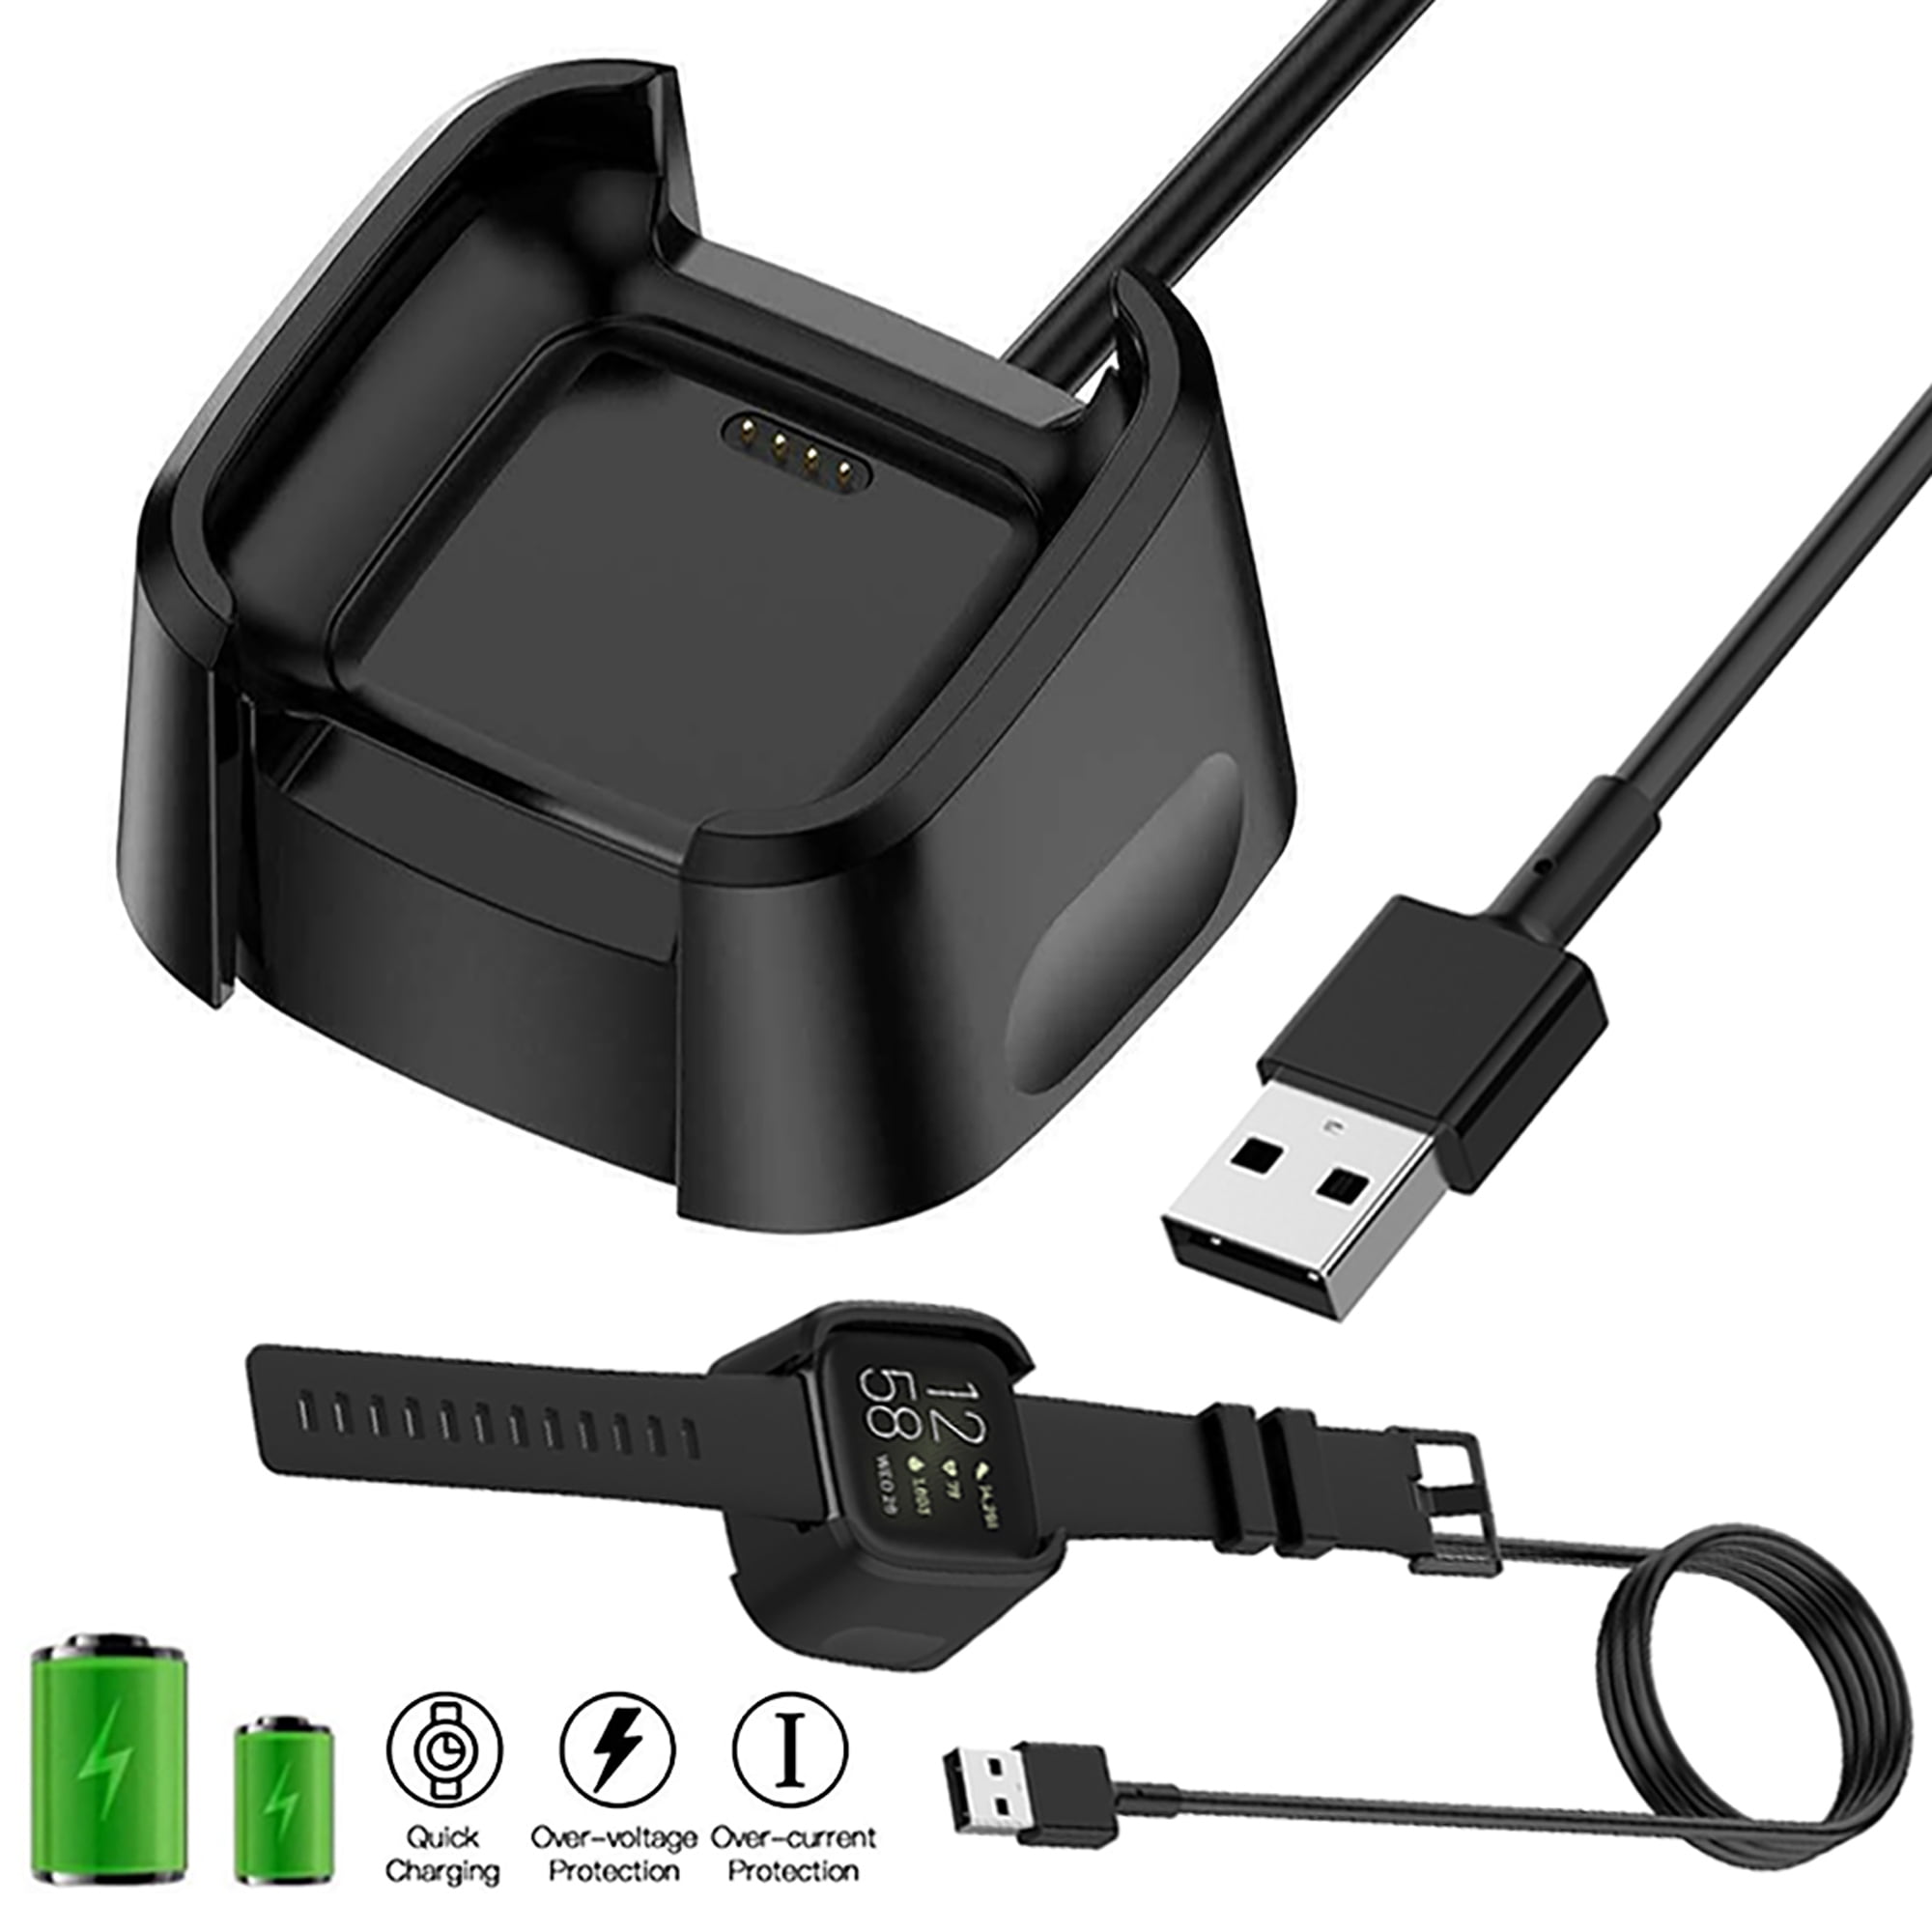 USB Replacement Charging Dock Station Cable Cord Charger for Fitbit Versa 2 for sale online 